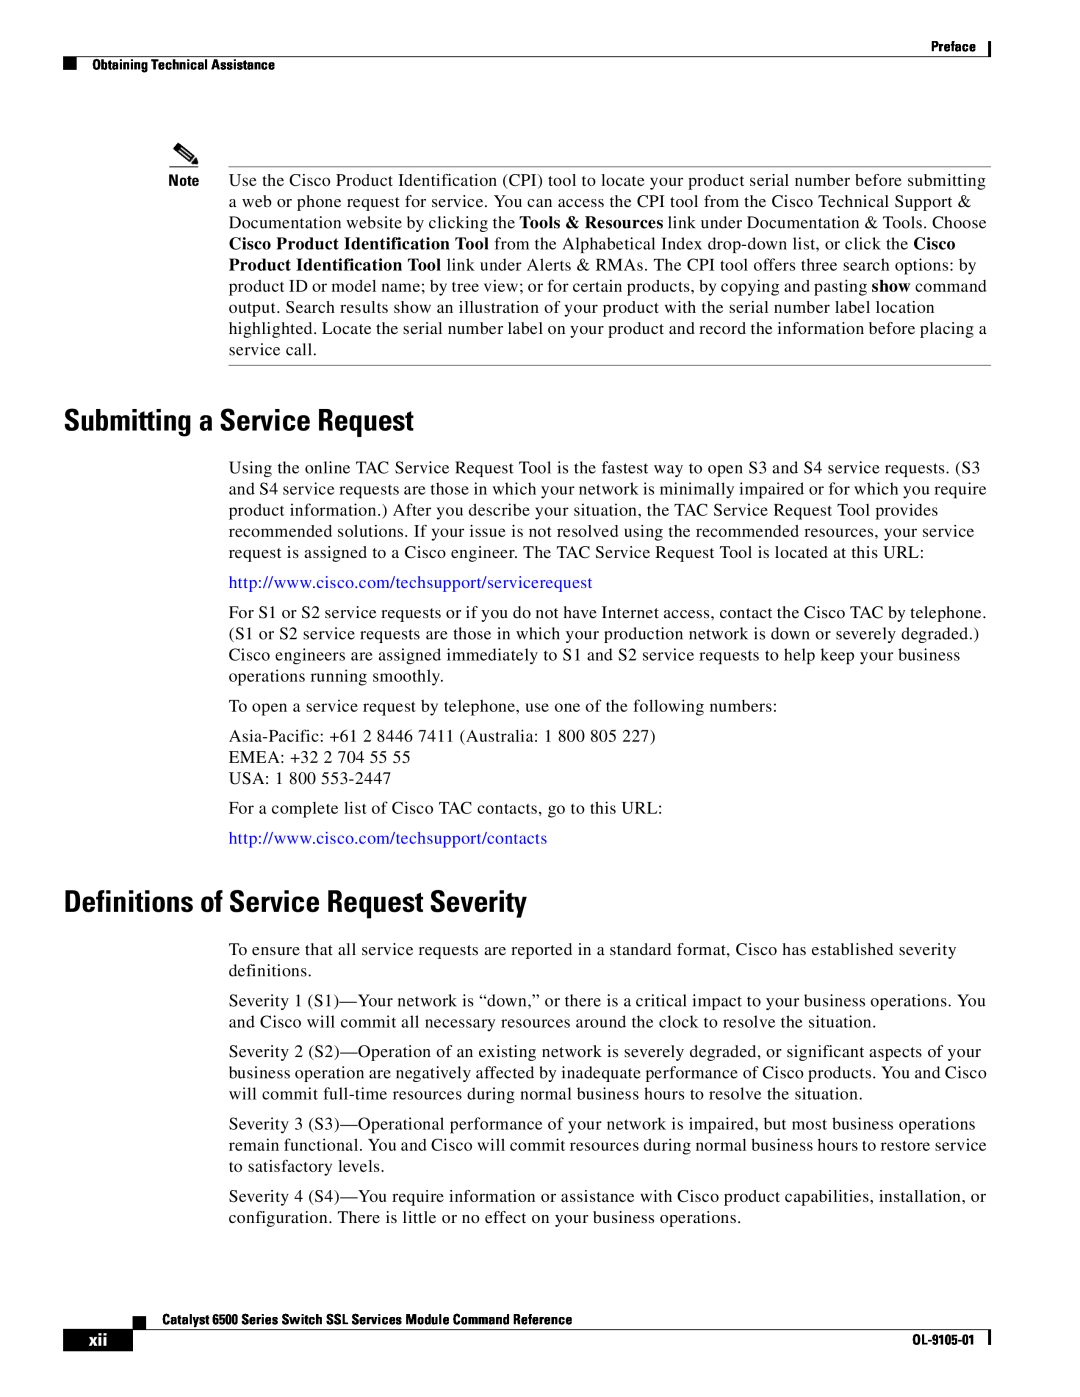 Cisco Systems 6500 manual Submitting a Service Request, Definitions of Service Request Severity 